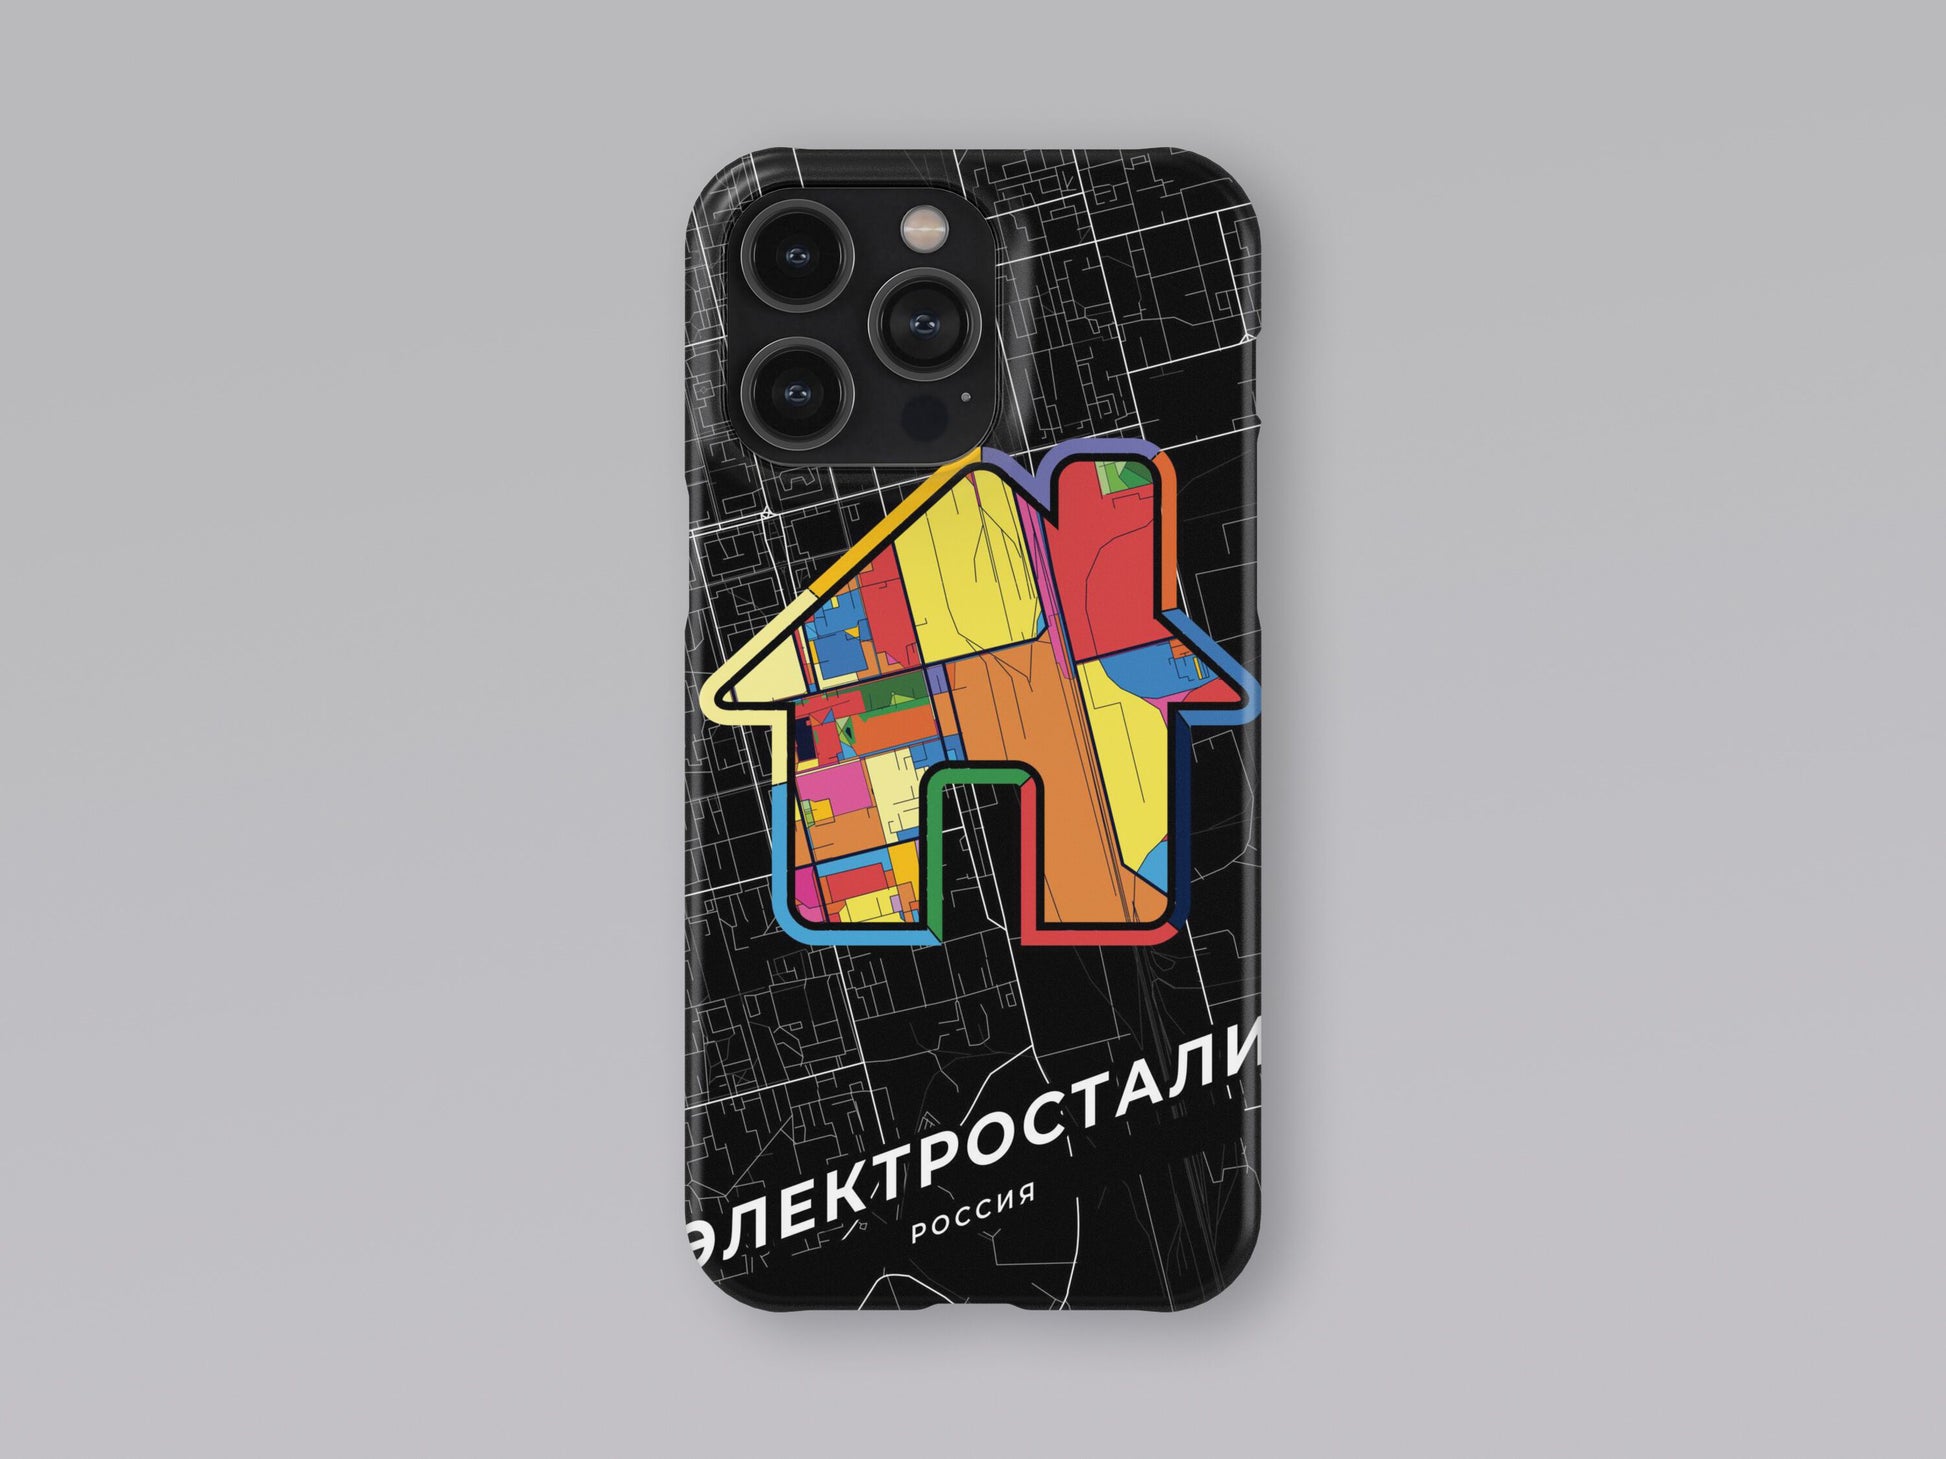 Elektrostal Russia slim phone case with colorful icon. Birthday, wedding or housewarming gift. Couple match cases. 3